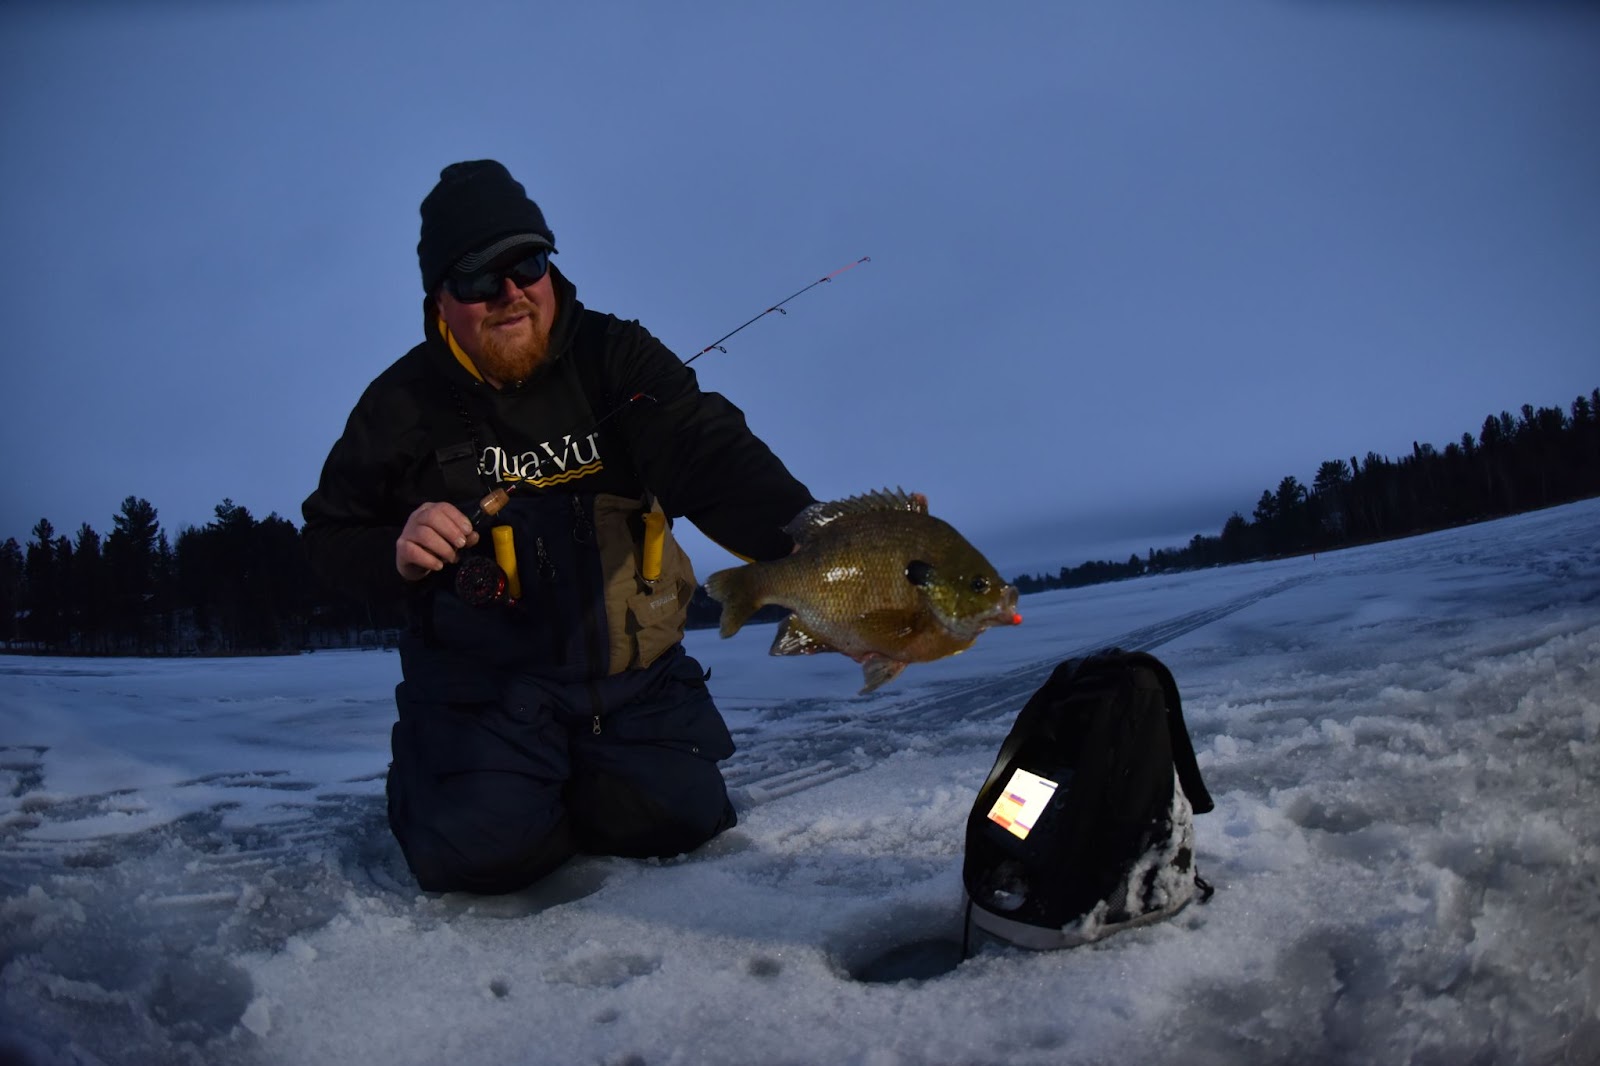 Check out new ice fishing tech, gear